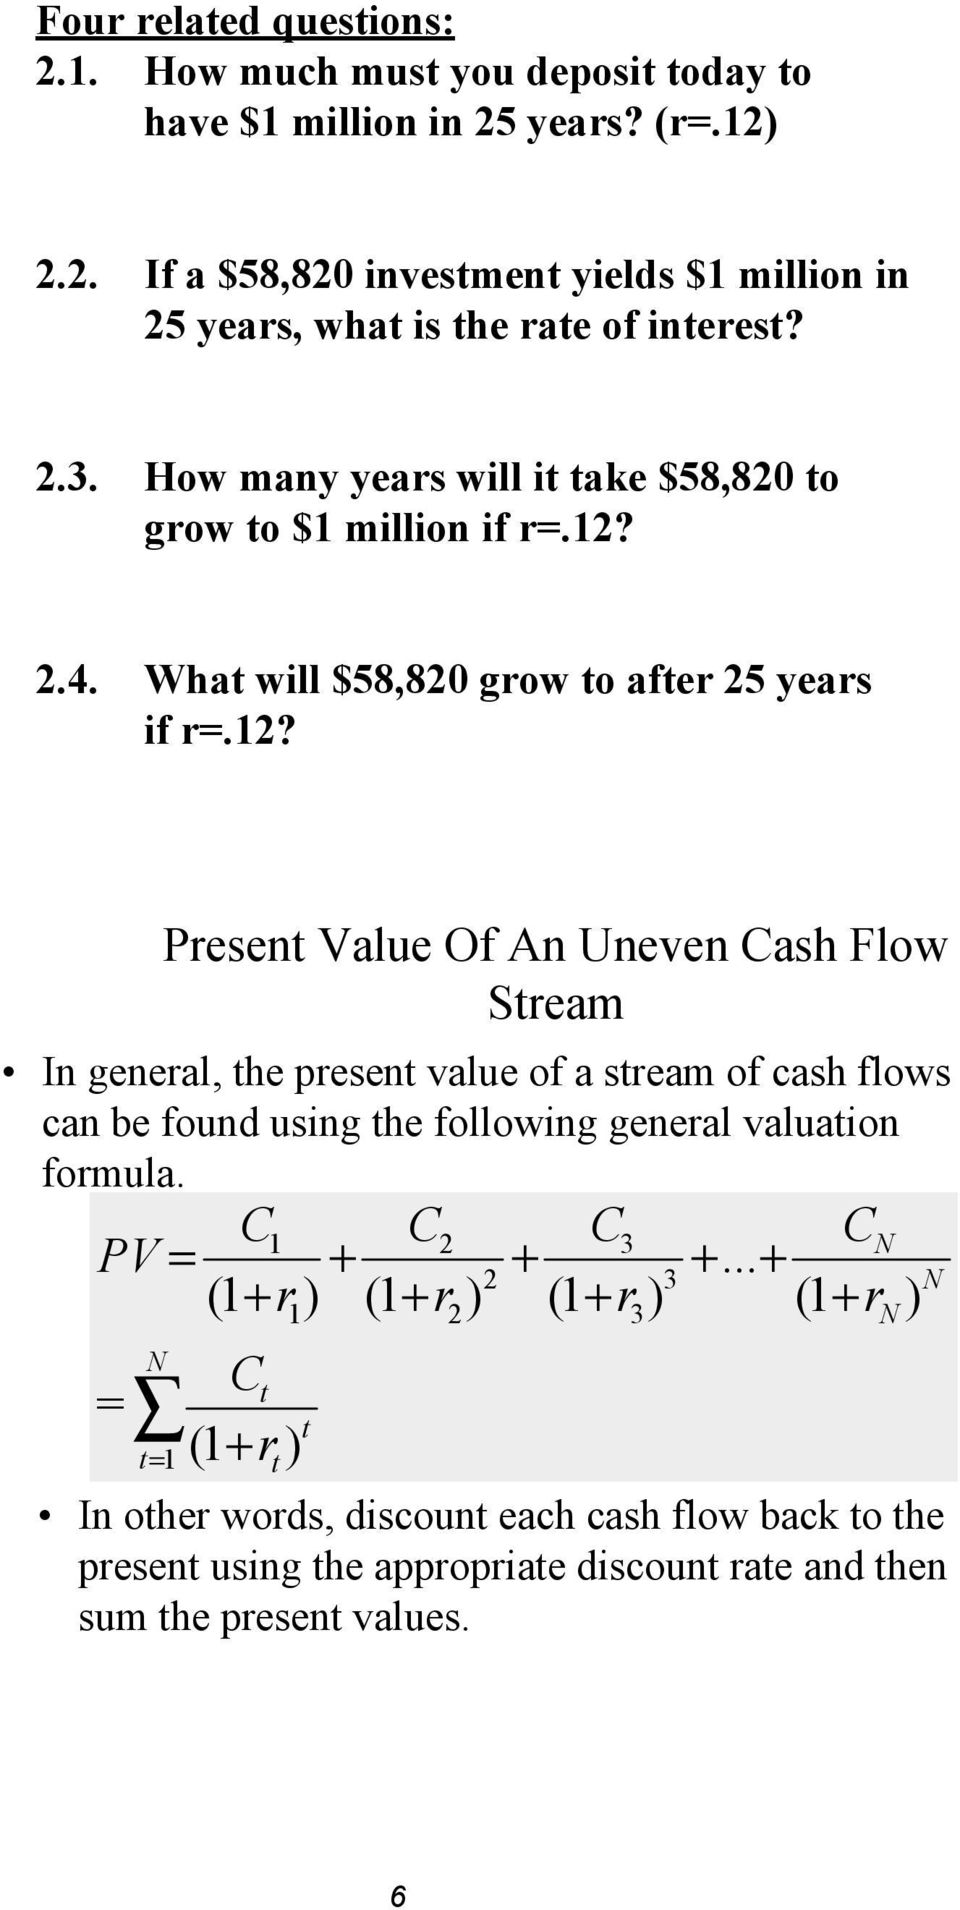 2.4. What will $58,820 grow to after 25 years if r=.12?